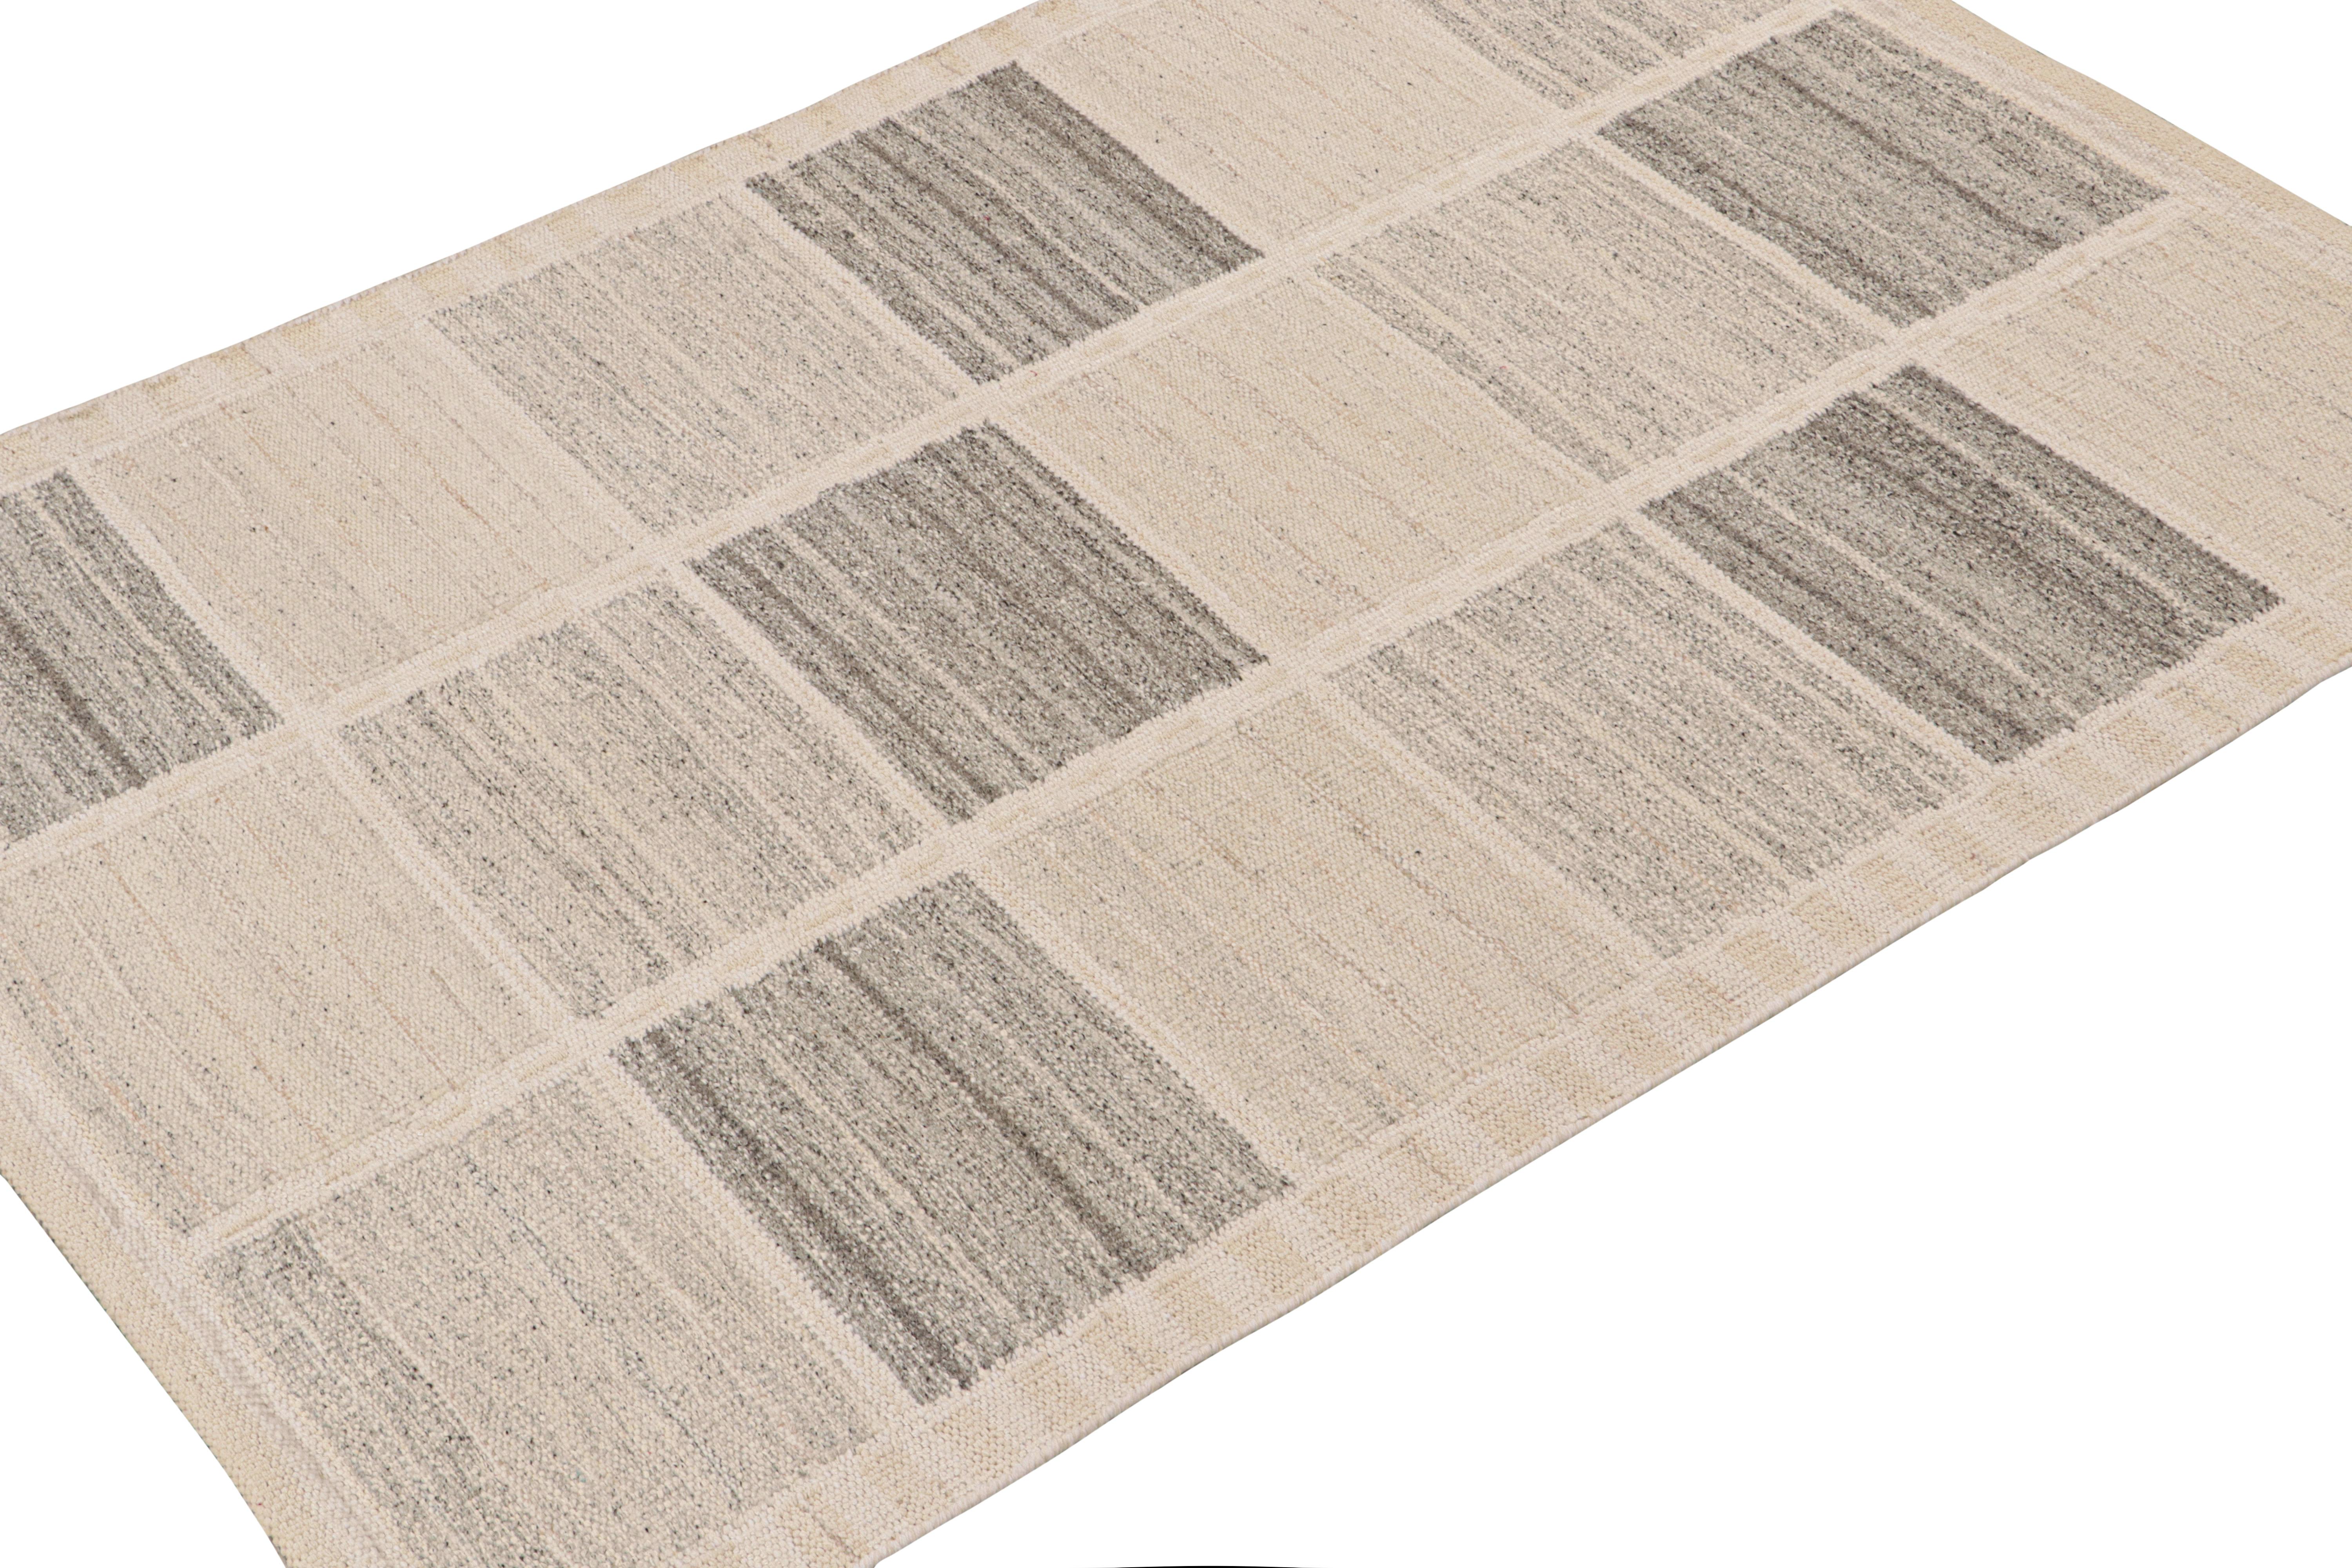 Modern Rug & Kilim’s Scandinavian Style Kilim with Beige and Gray Geometric Patterns For Sale